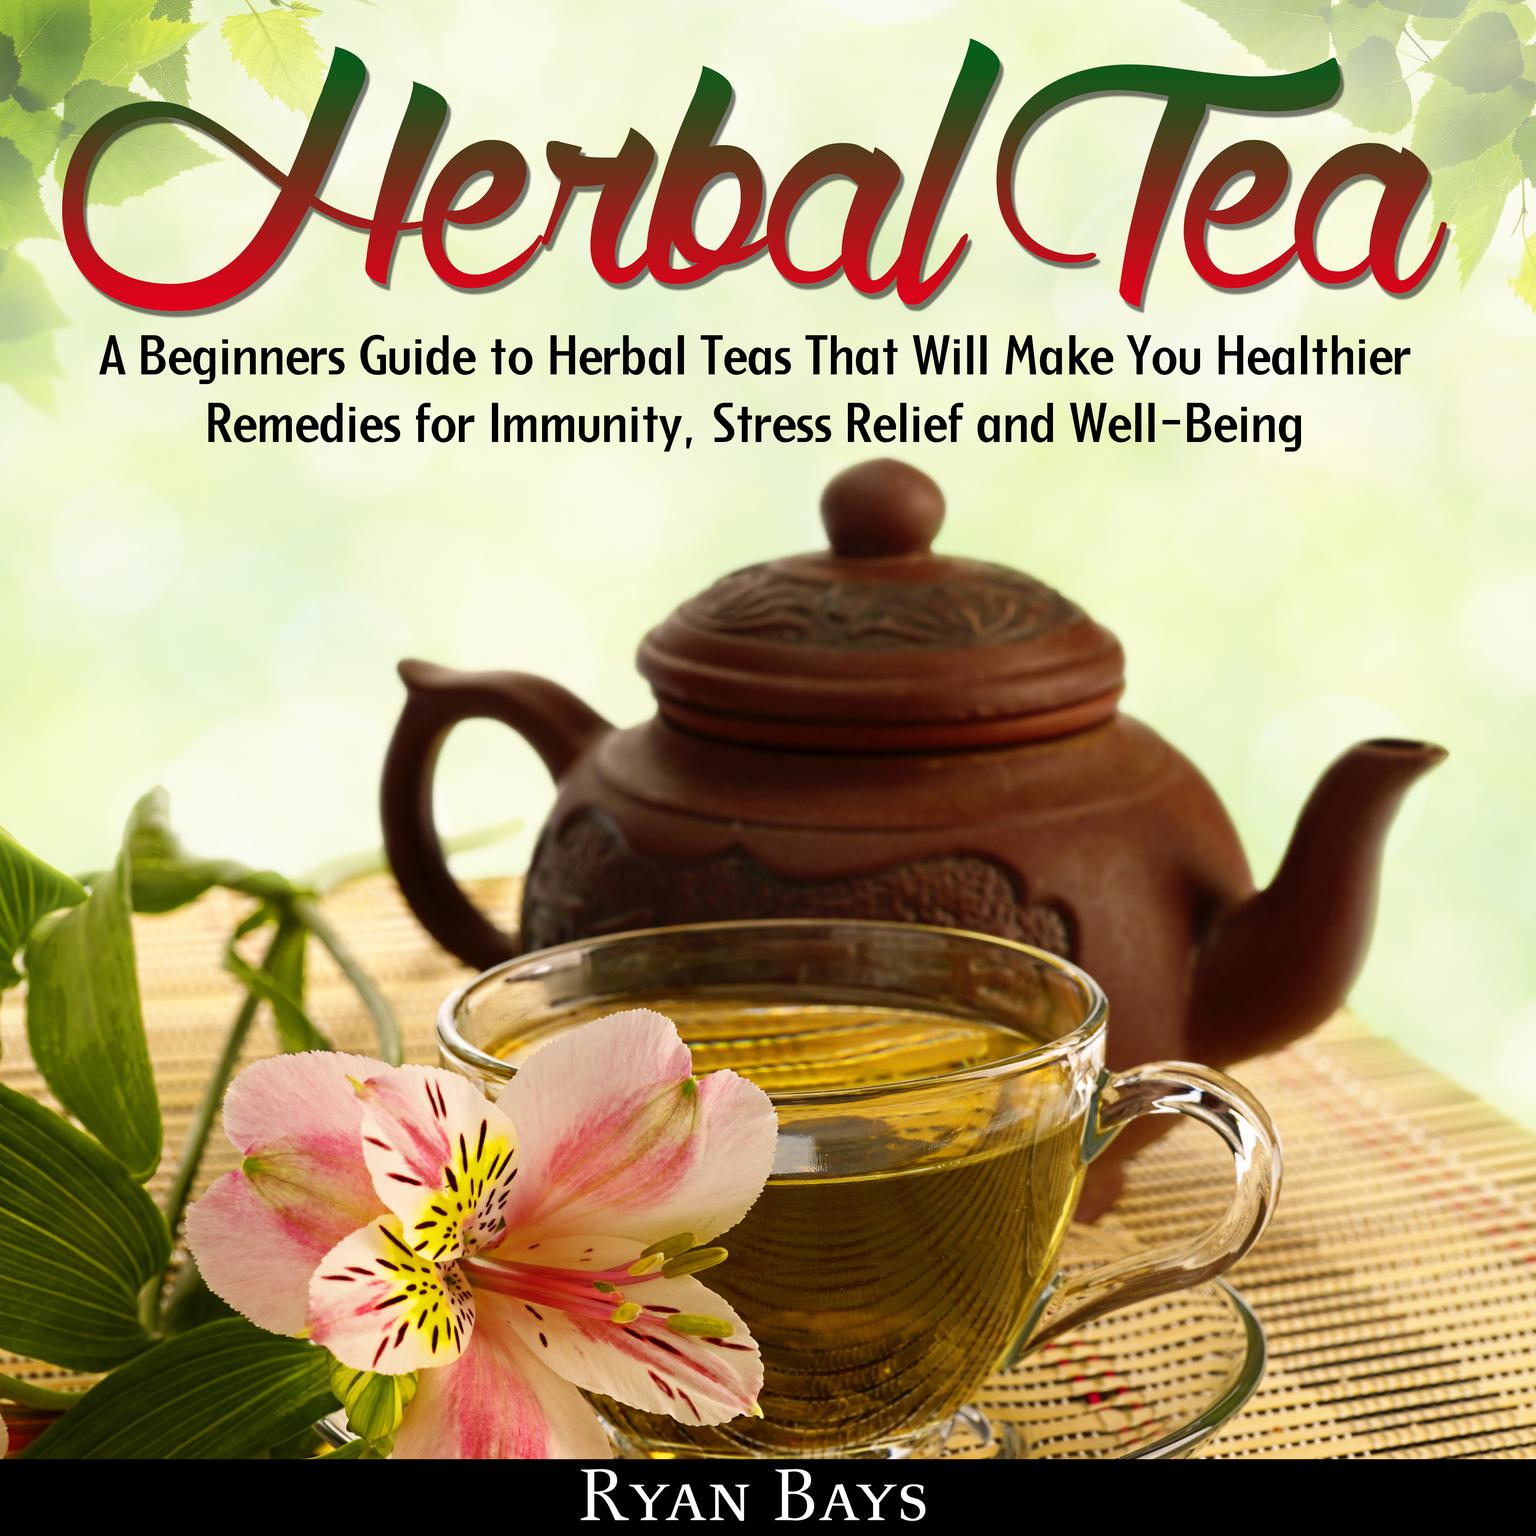 Herbal Tea: A Beginners Guide to Herbal Teas That Will Make You Healthier; Remedies for Immunity, Stress Relief and Well-Being Audiobook, by Ryan Bays